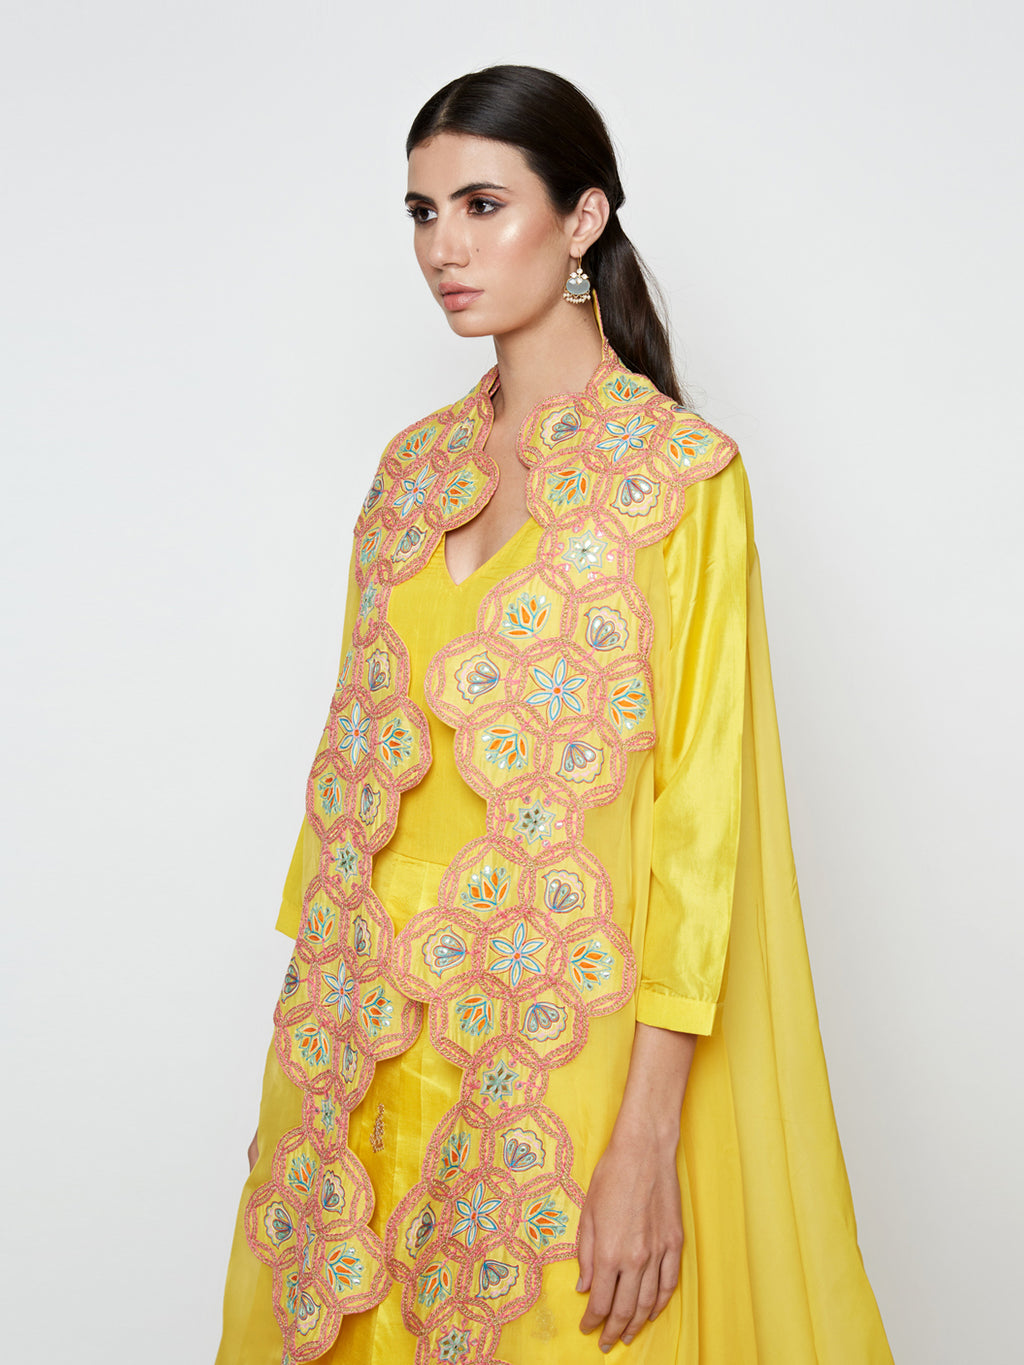 Yellow Pleated Dress with Yellow Embroidered Cape